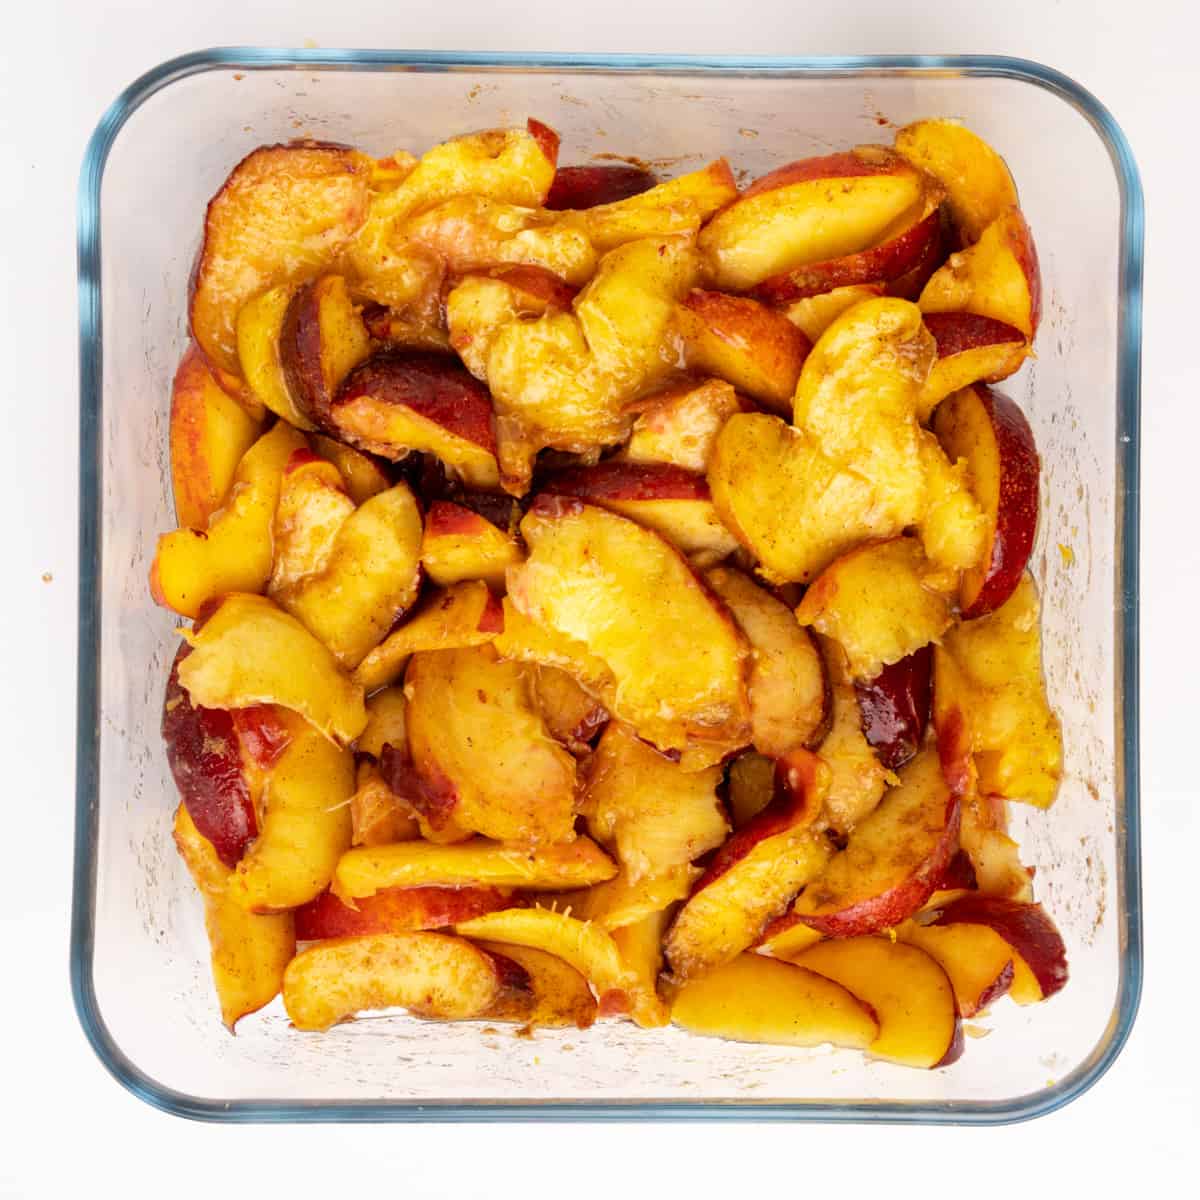 Sliced peaches mixed with spices, cornstarch and lemon in a baking dish.